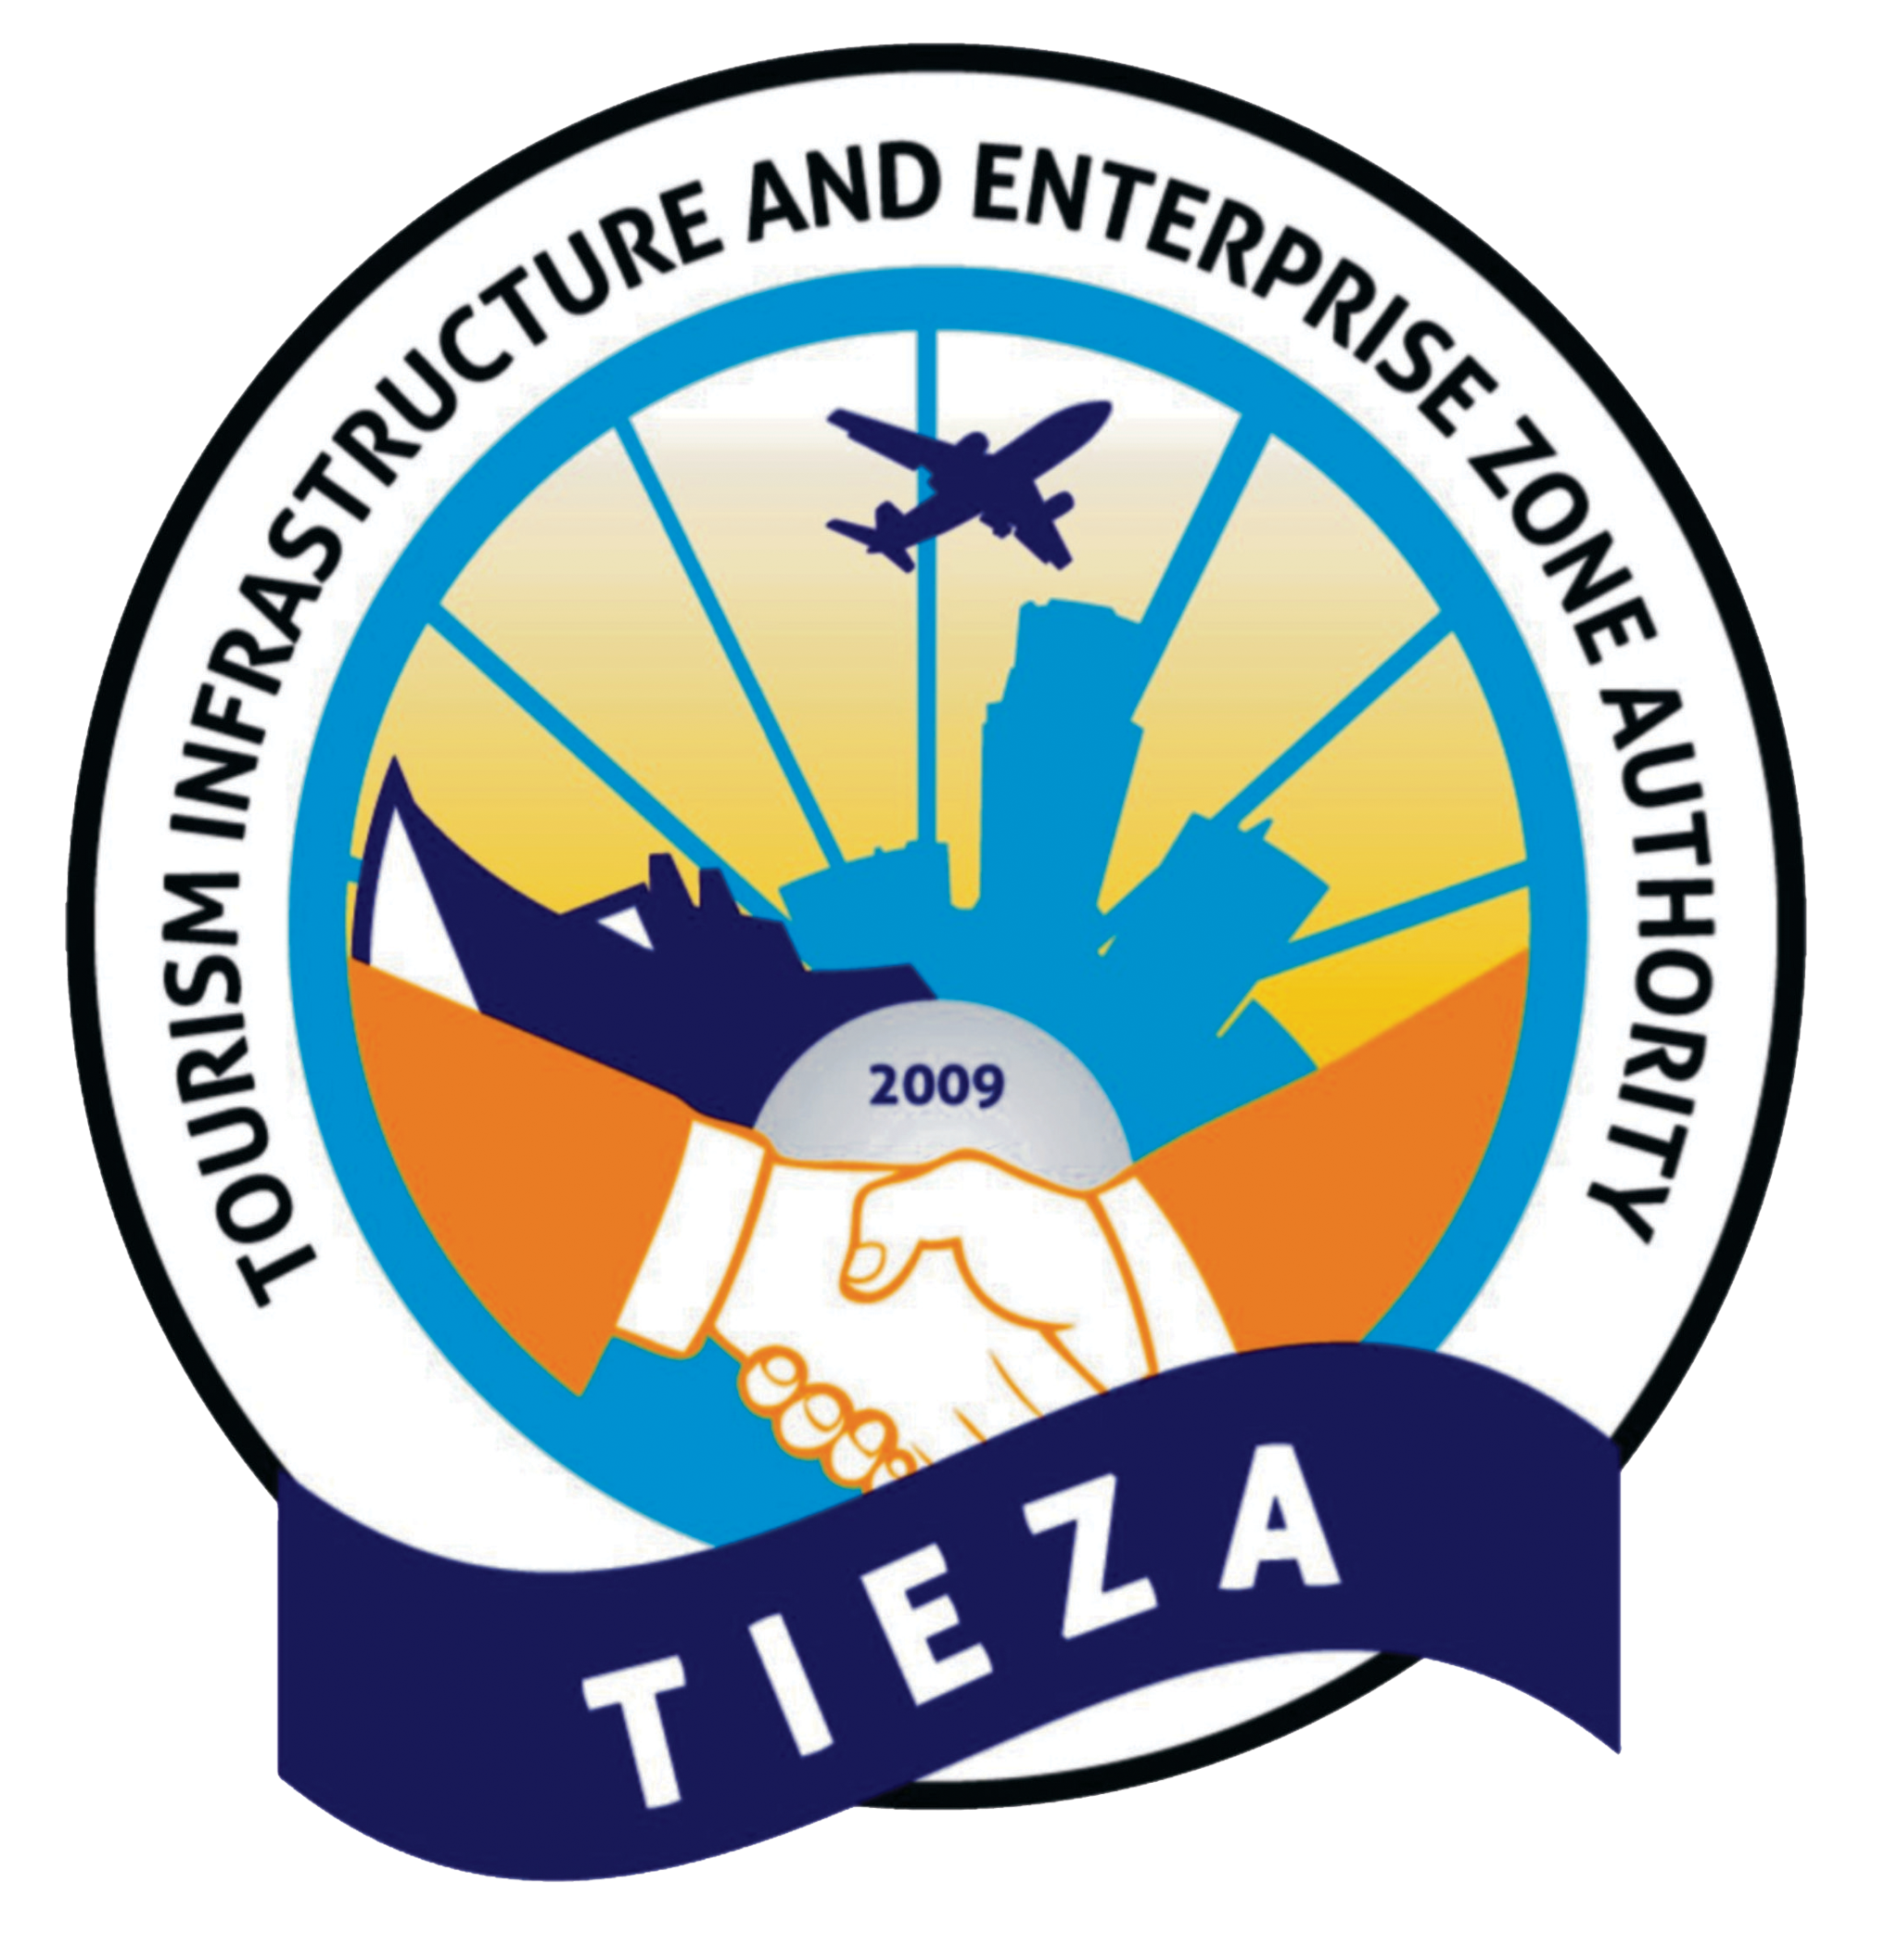 tourism infrastructure and enterprise zone authority head